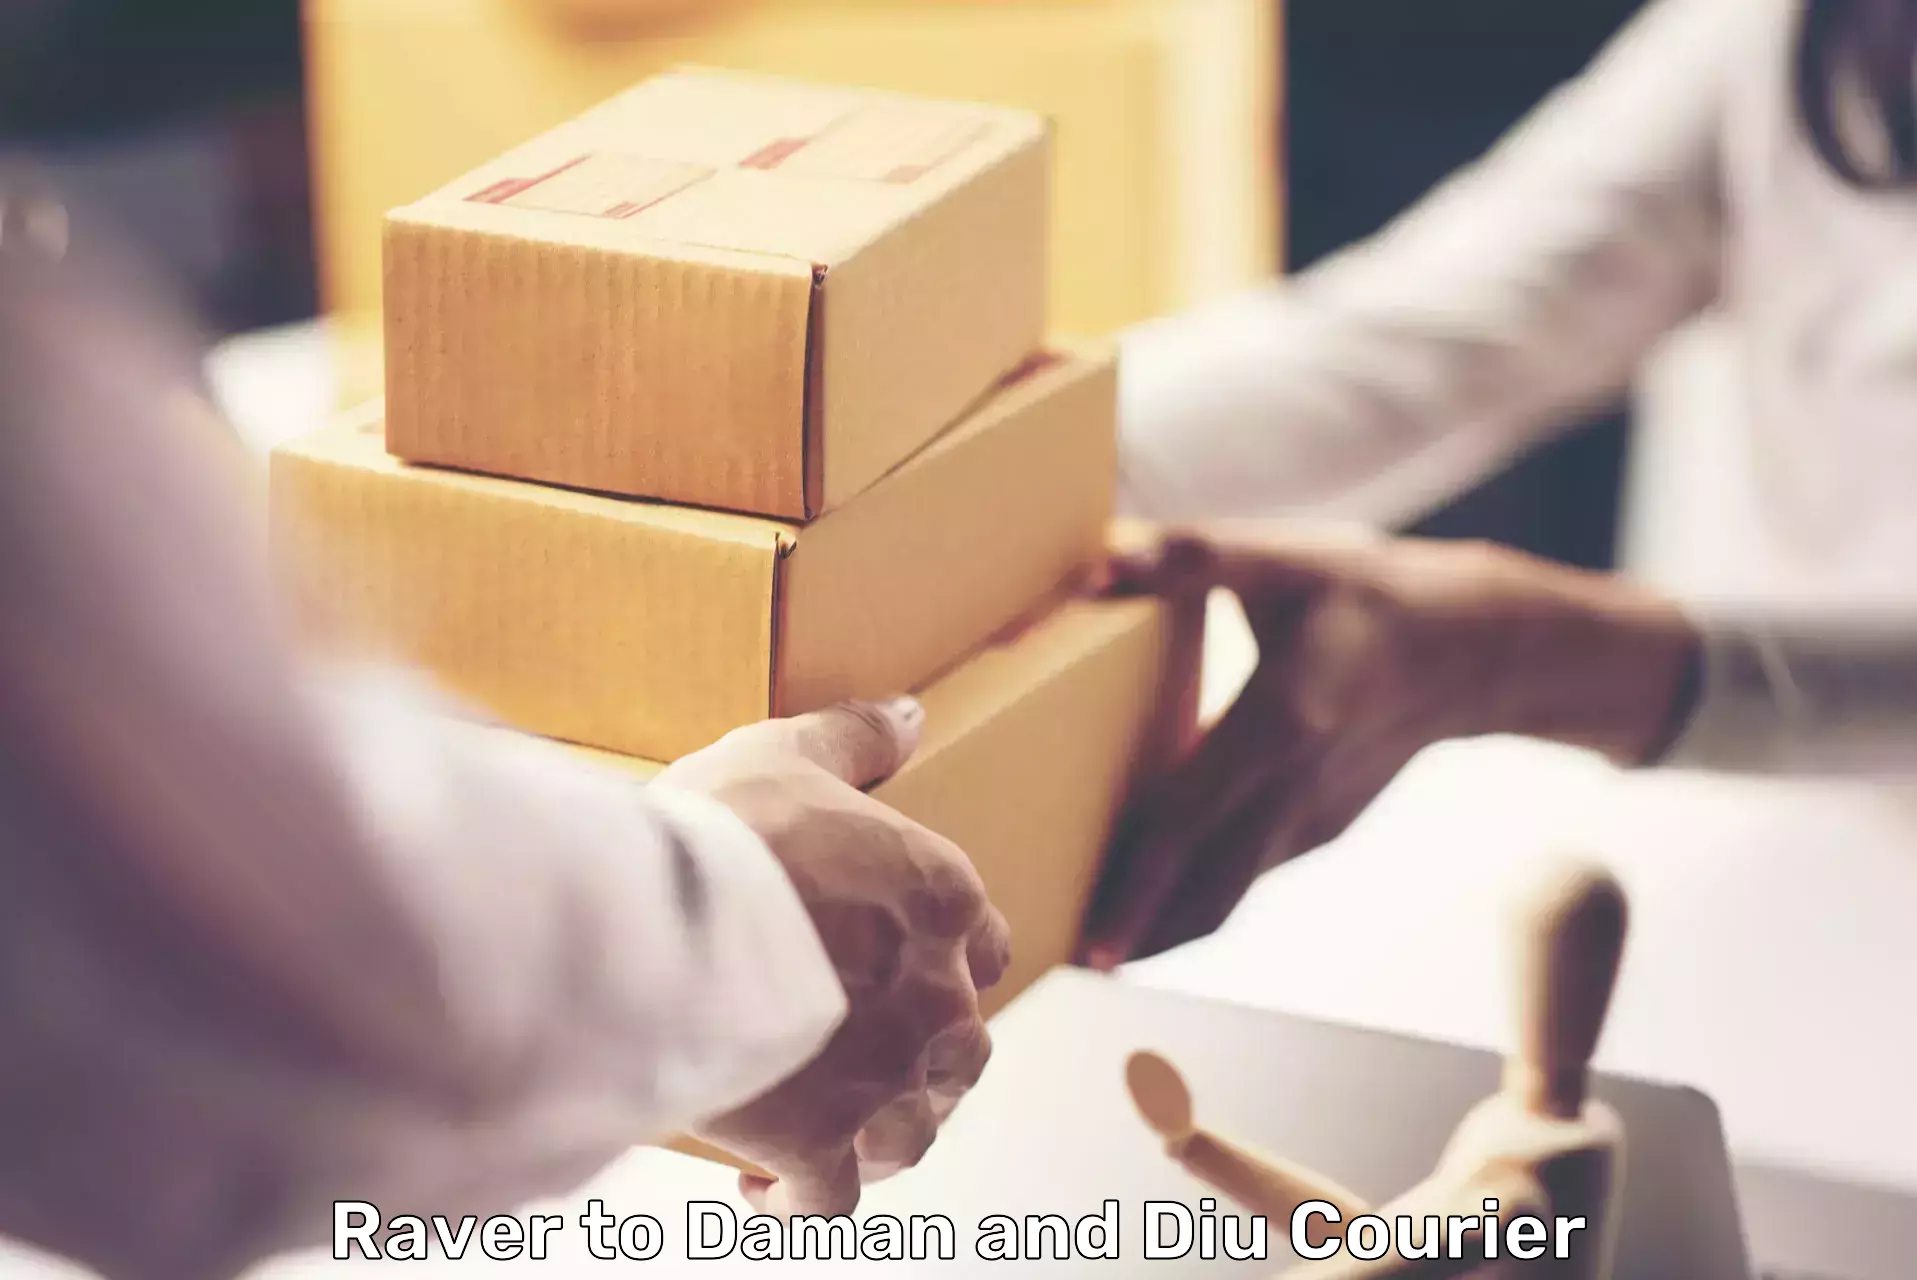 Global courier networks Raver to Daman